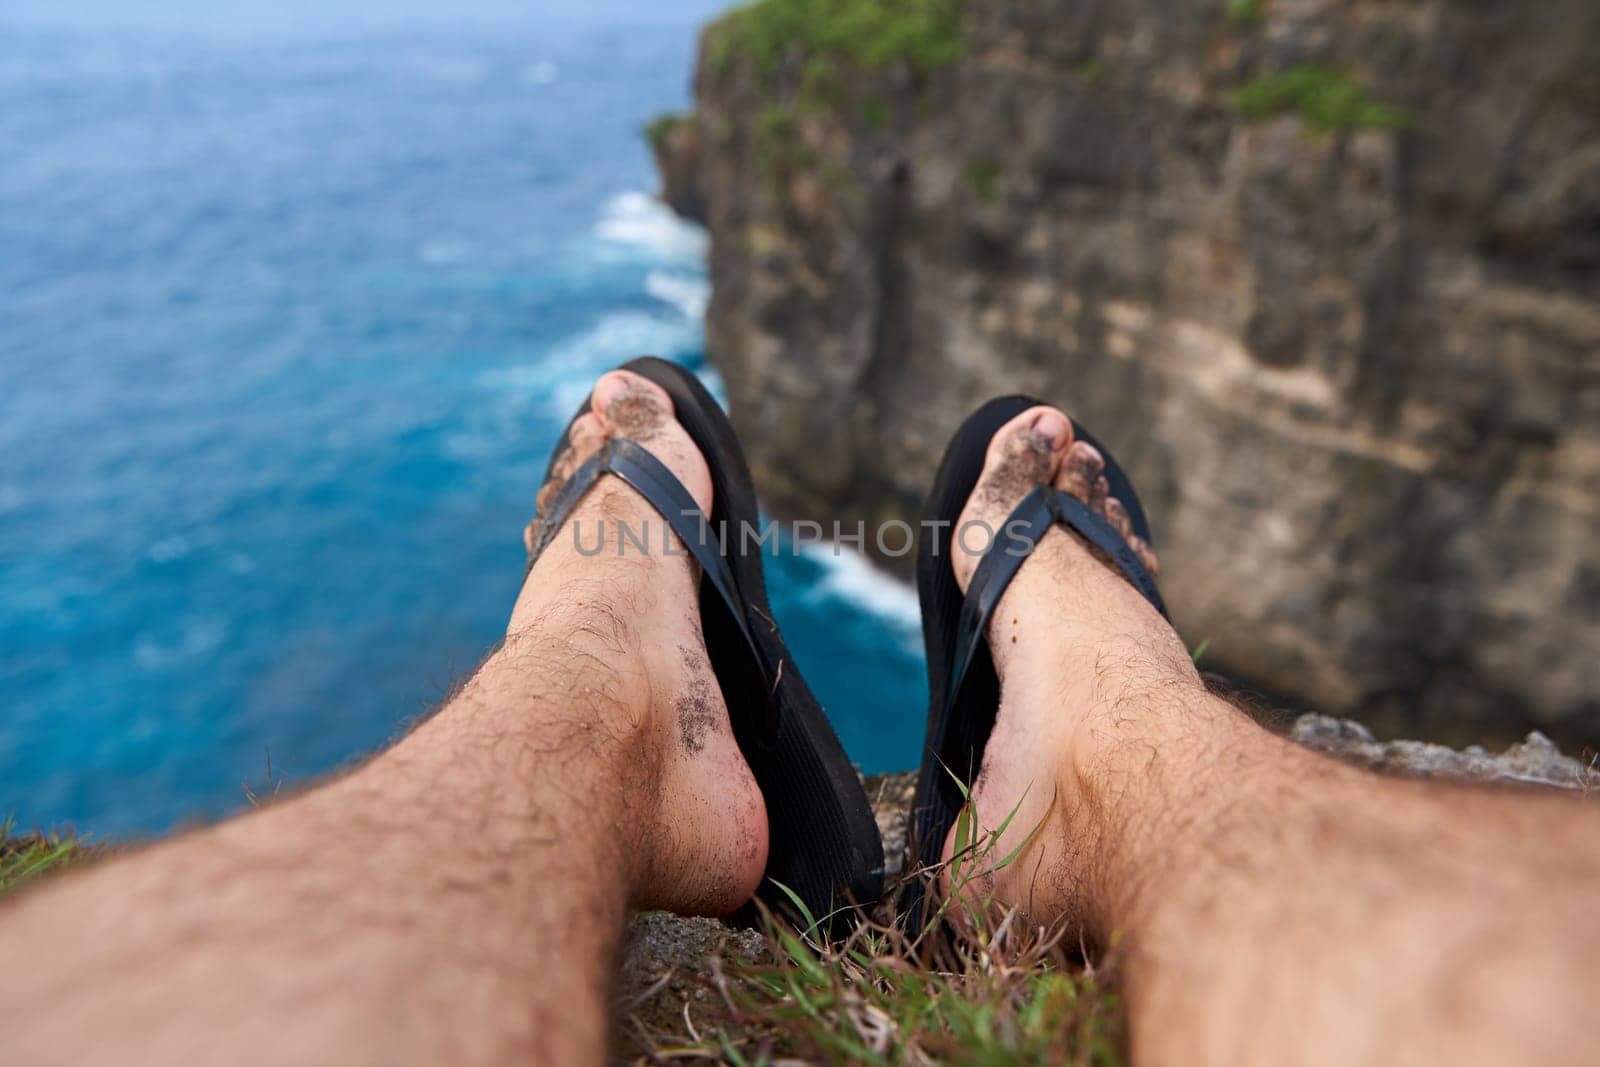 A man sits on a cliff with his legs dangling over an abyss above the ocean. First person photo